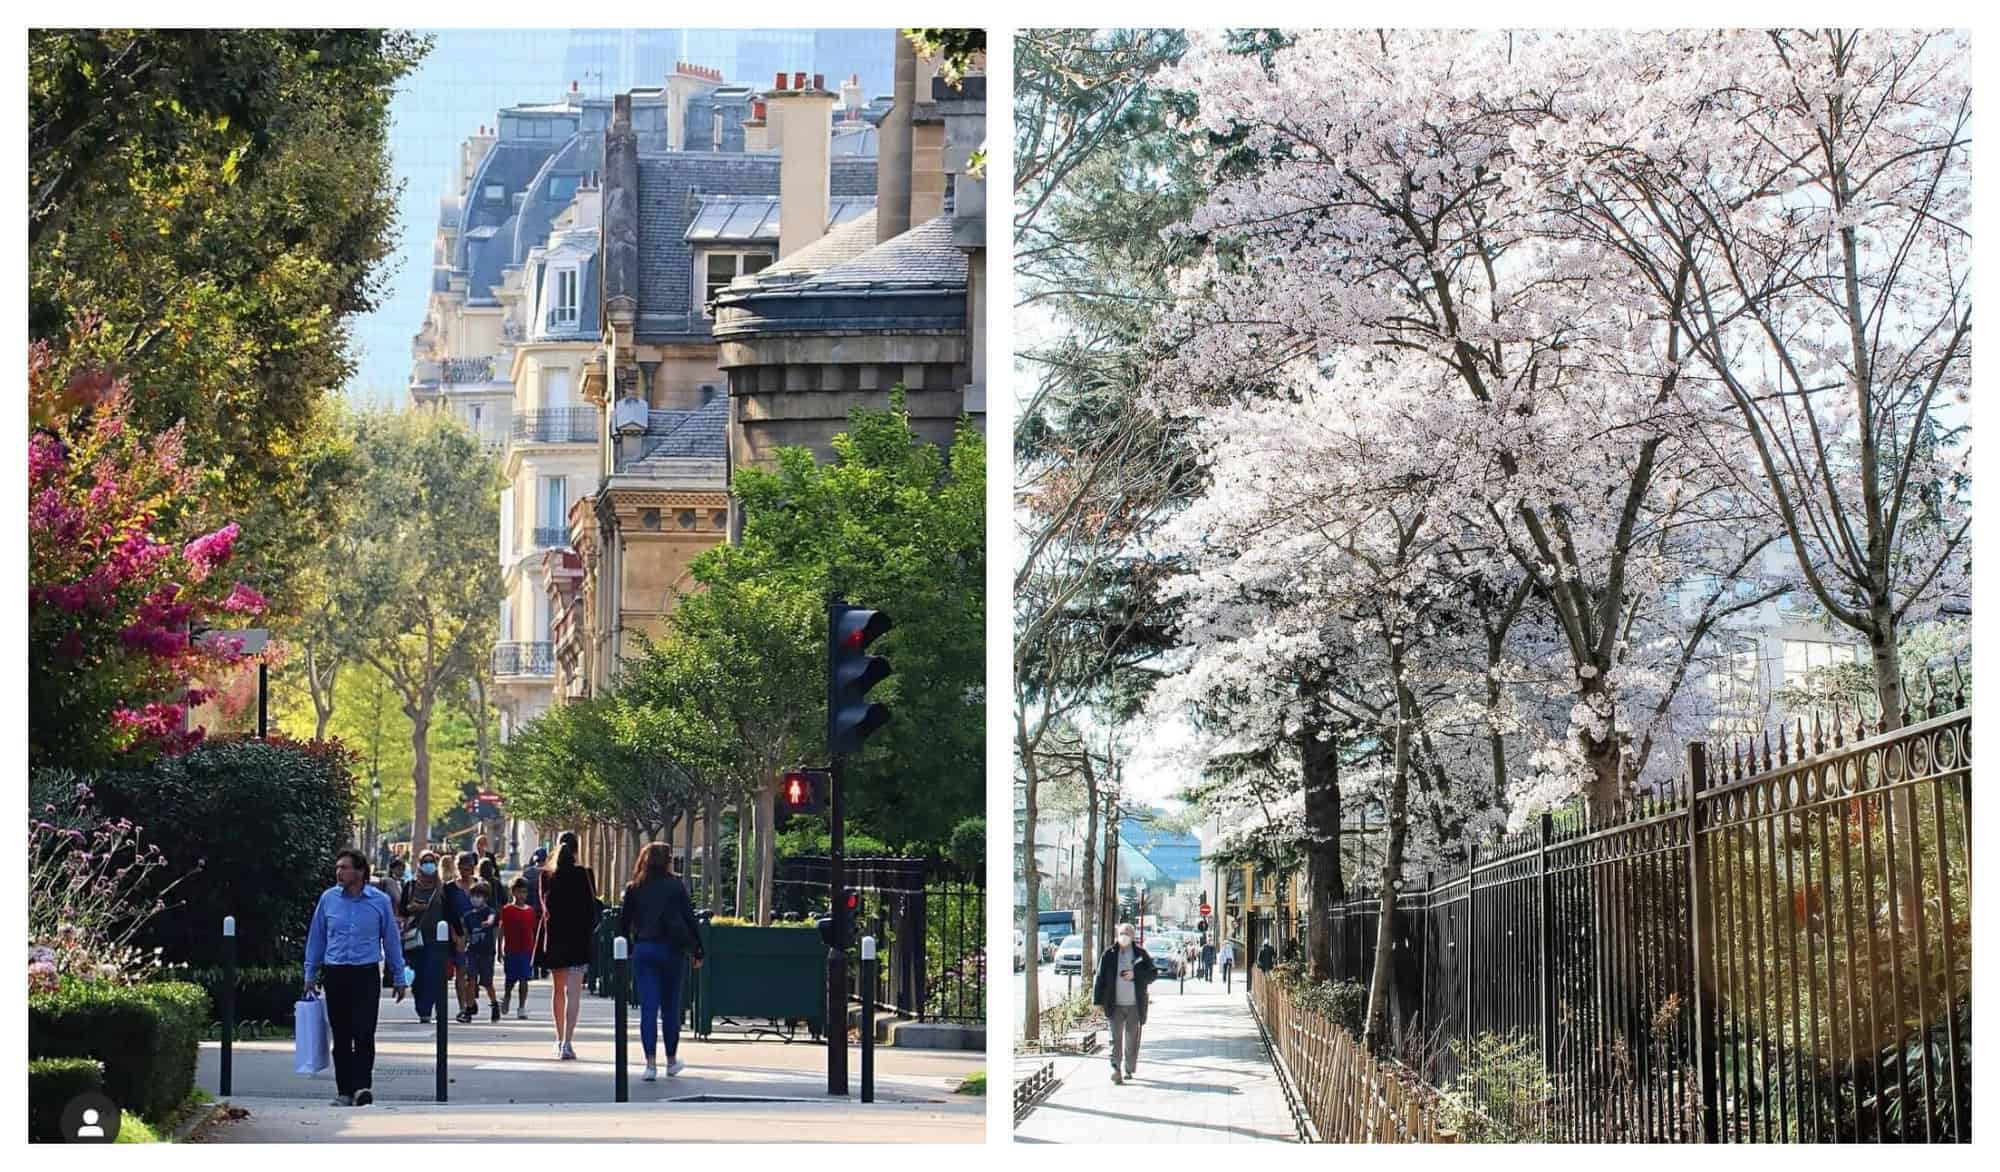 On the left are residents walking on a city street full of greeneries, pink flowers, and beige buildings. On the right are cherry trees blooming with white flowers and a man in blue shirt.